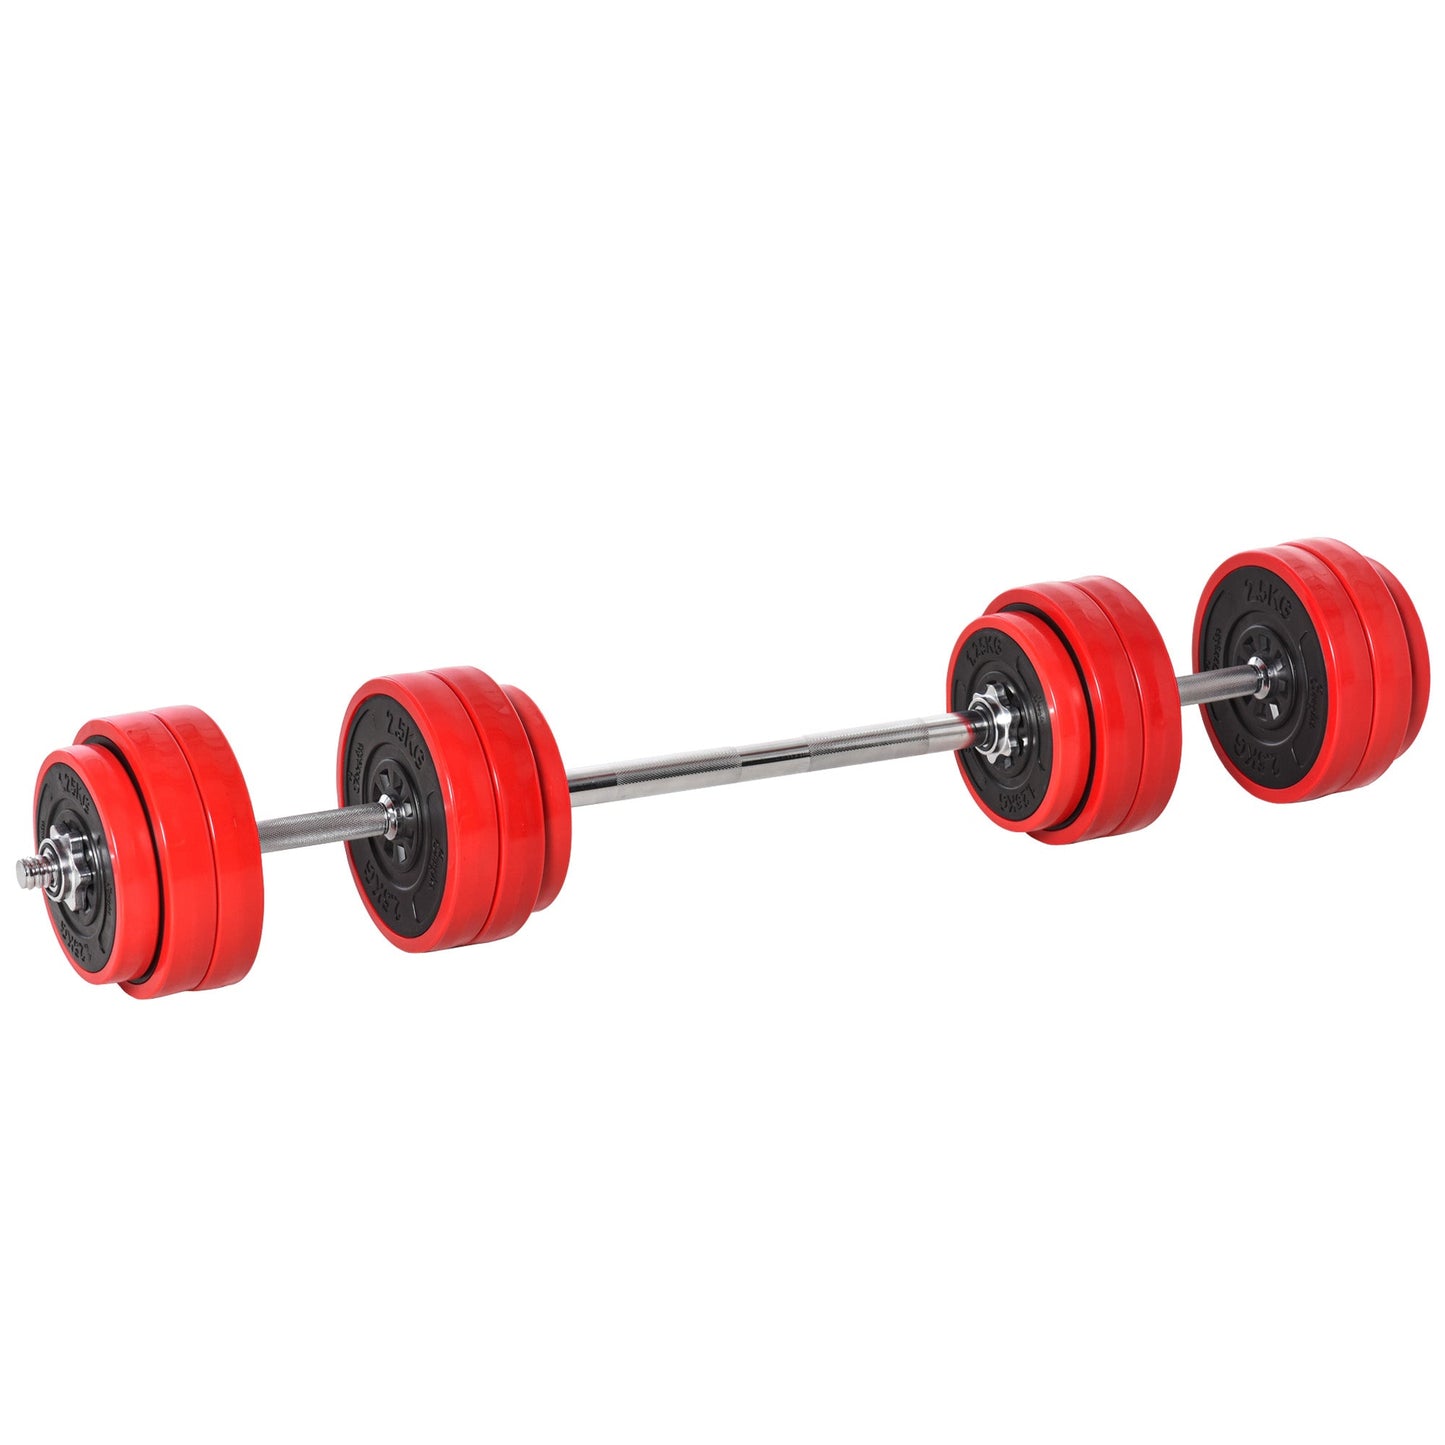 HOMCOM 30KGS 2-In-1 Dumbbell & Barbell Adjustable Set Strength Muscle Exercise Fitness Plate Bar Clamp Rod Home Gym Sports Area